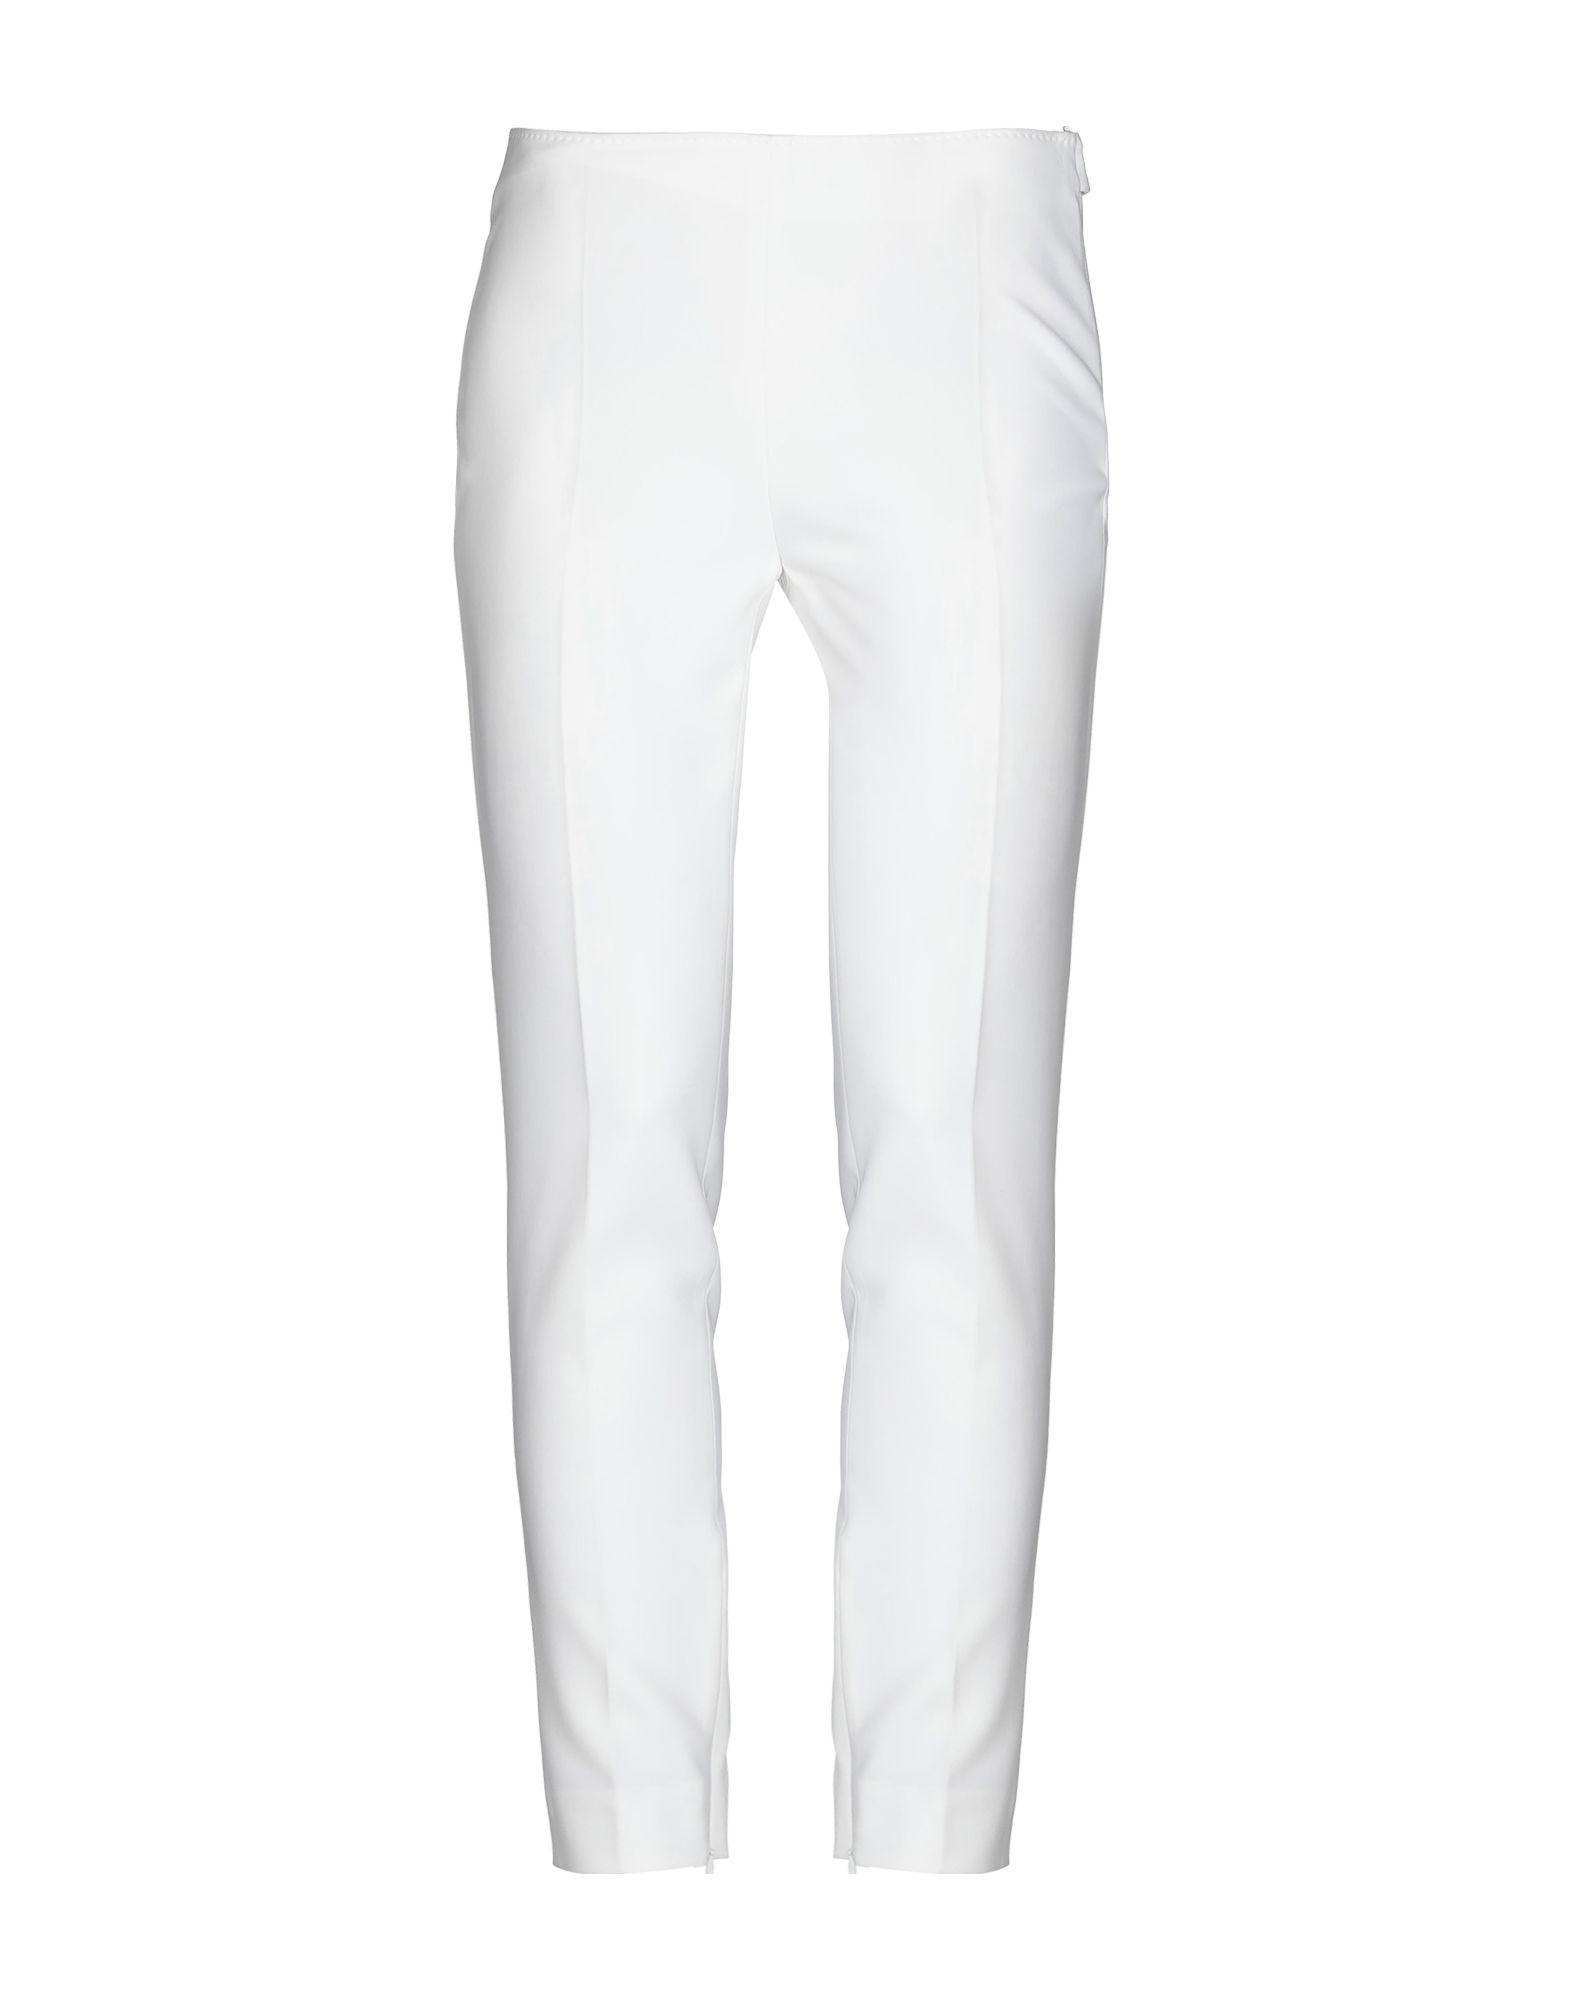 Moschino Synthetic Casual Pants in White - Lyst